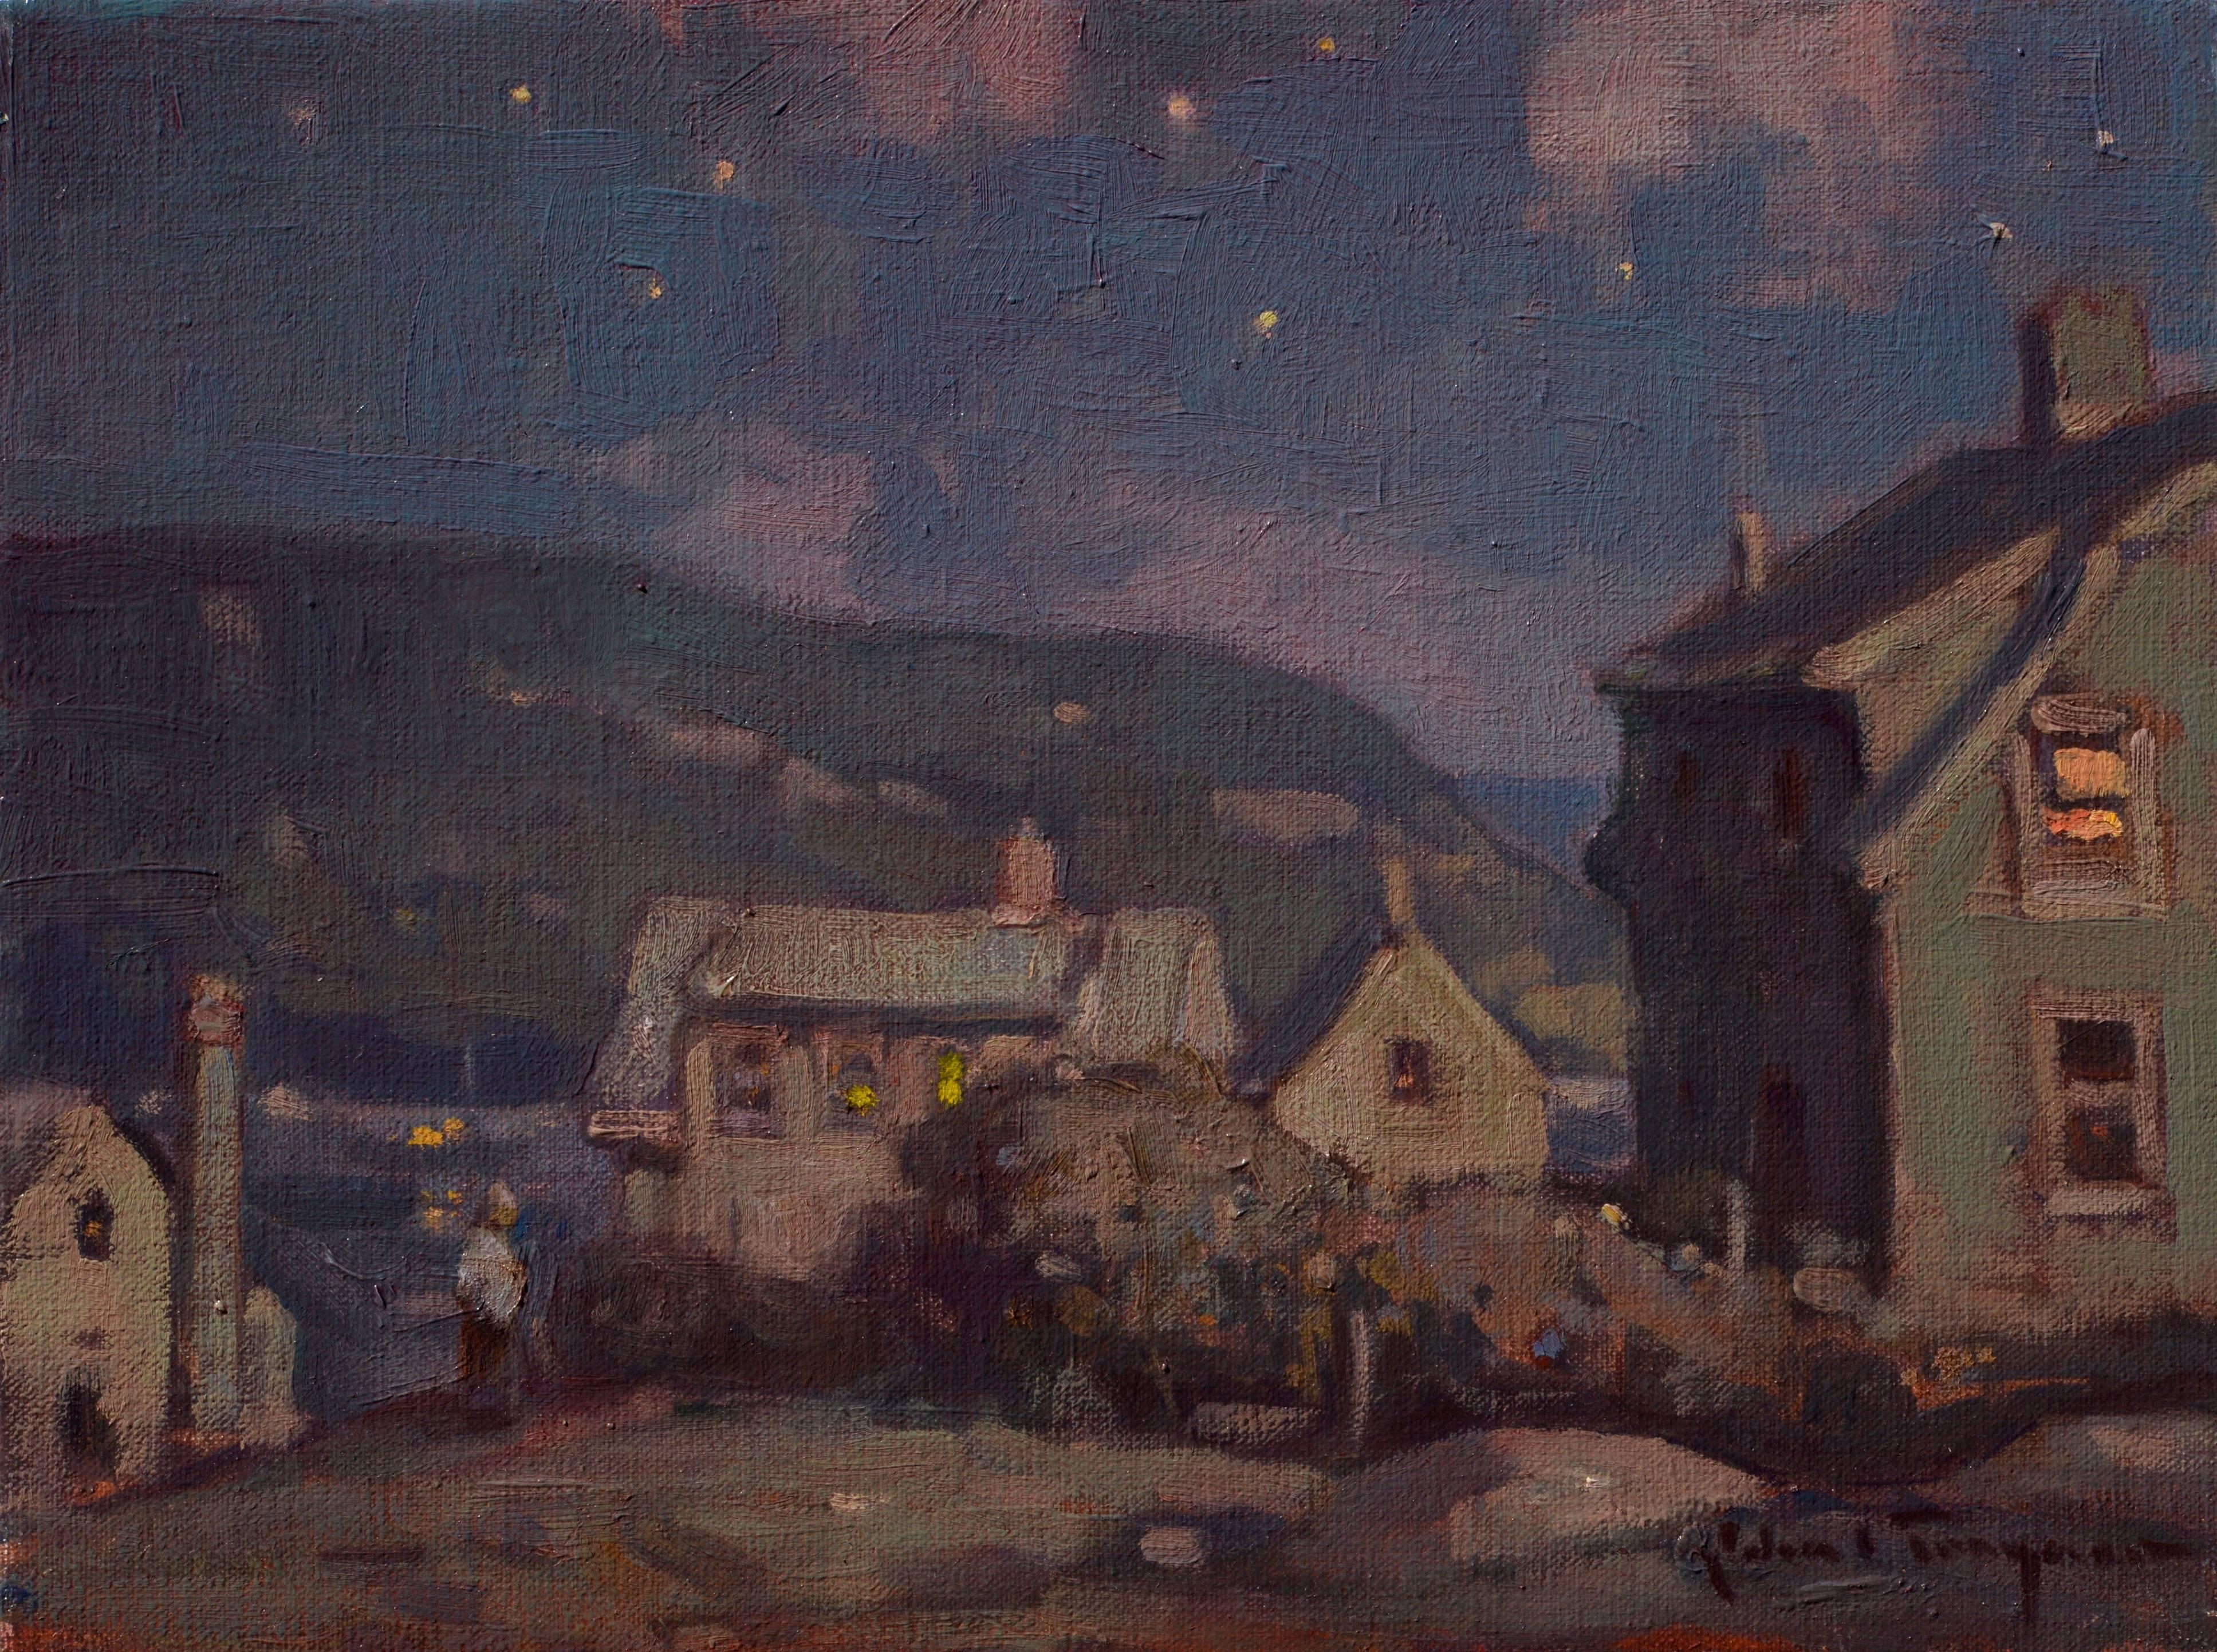 Monhegan, Nocturnal - Painting by John C. Traynor